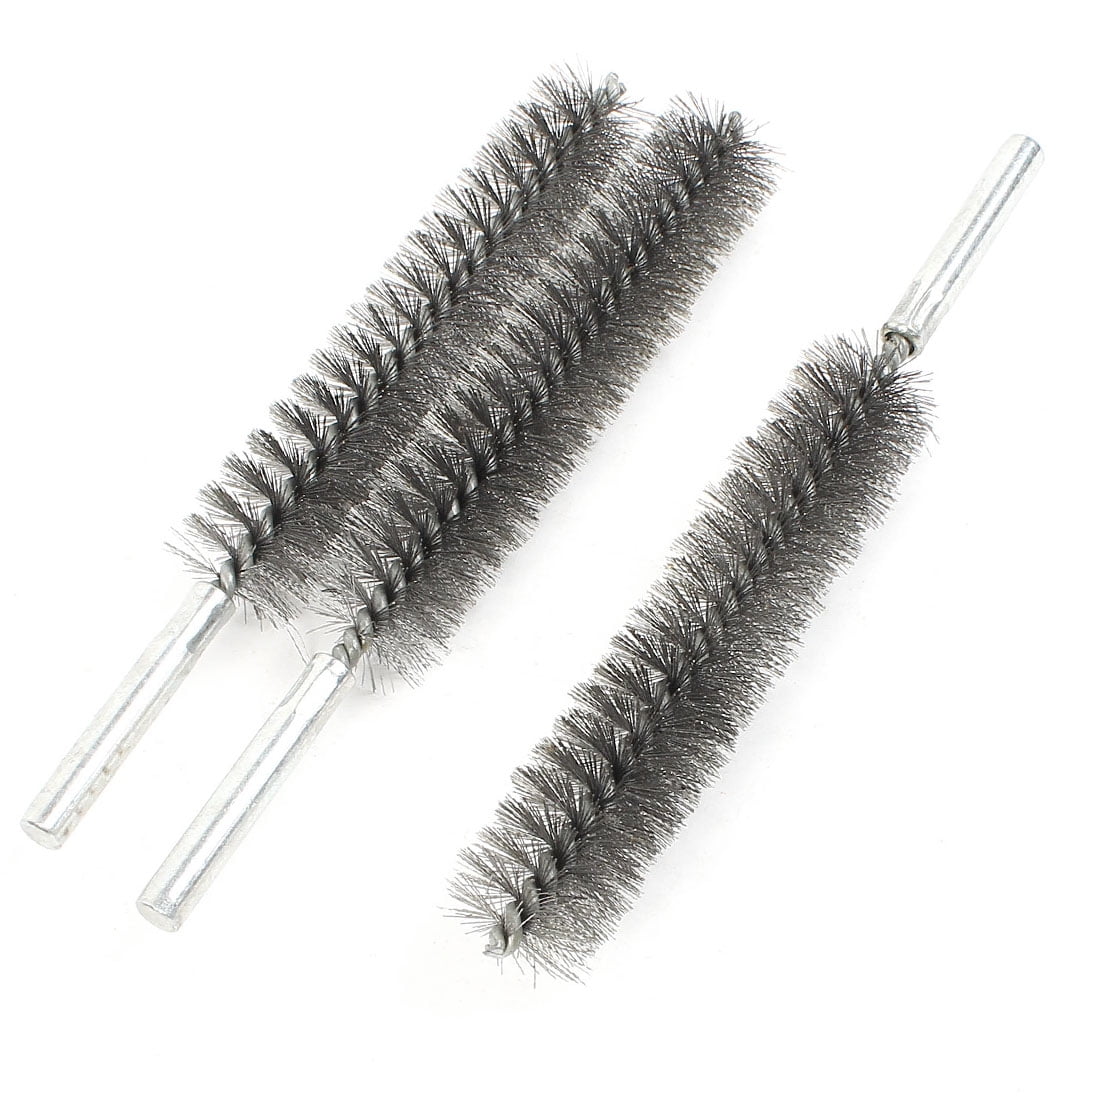 8pcs Stainless Steel Wire Bore Brushes Pipe Cleaner Brush Tube